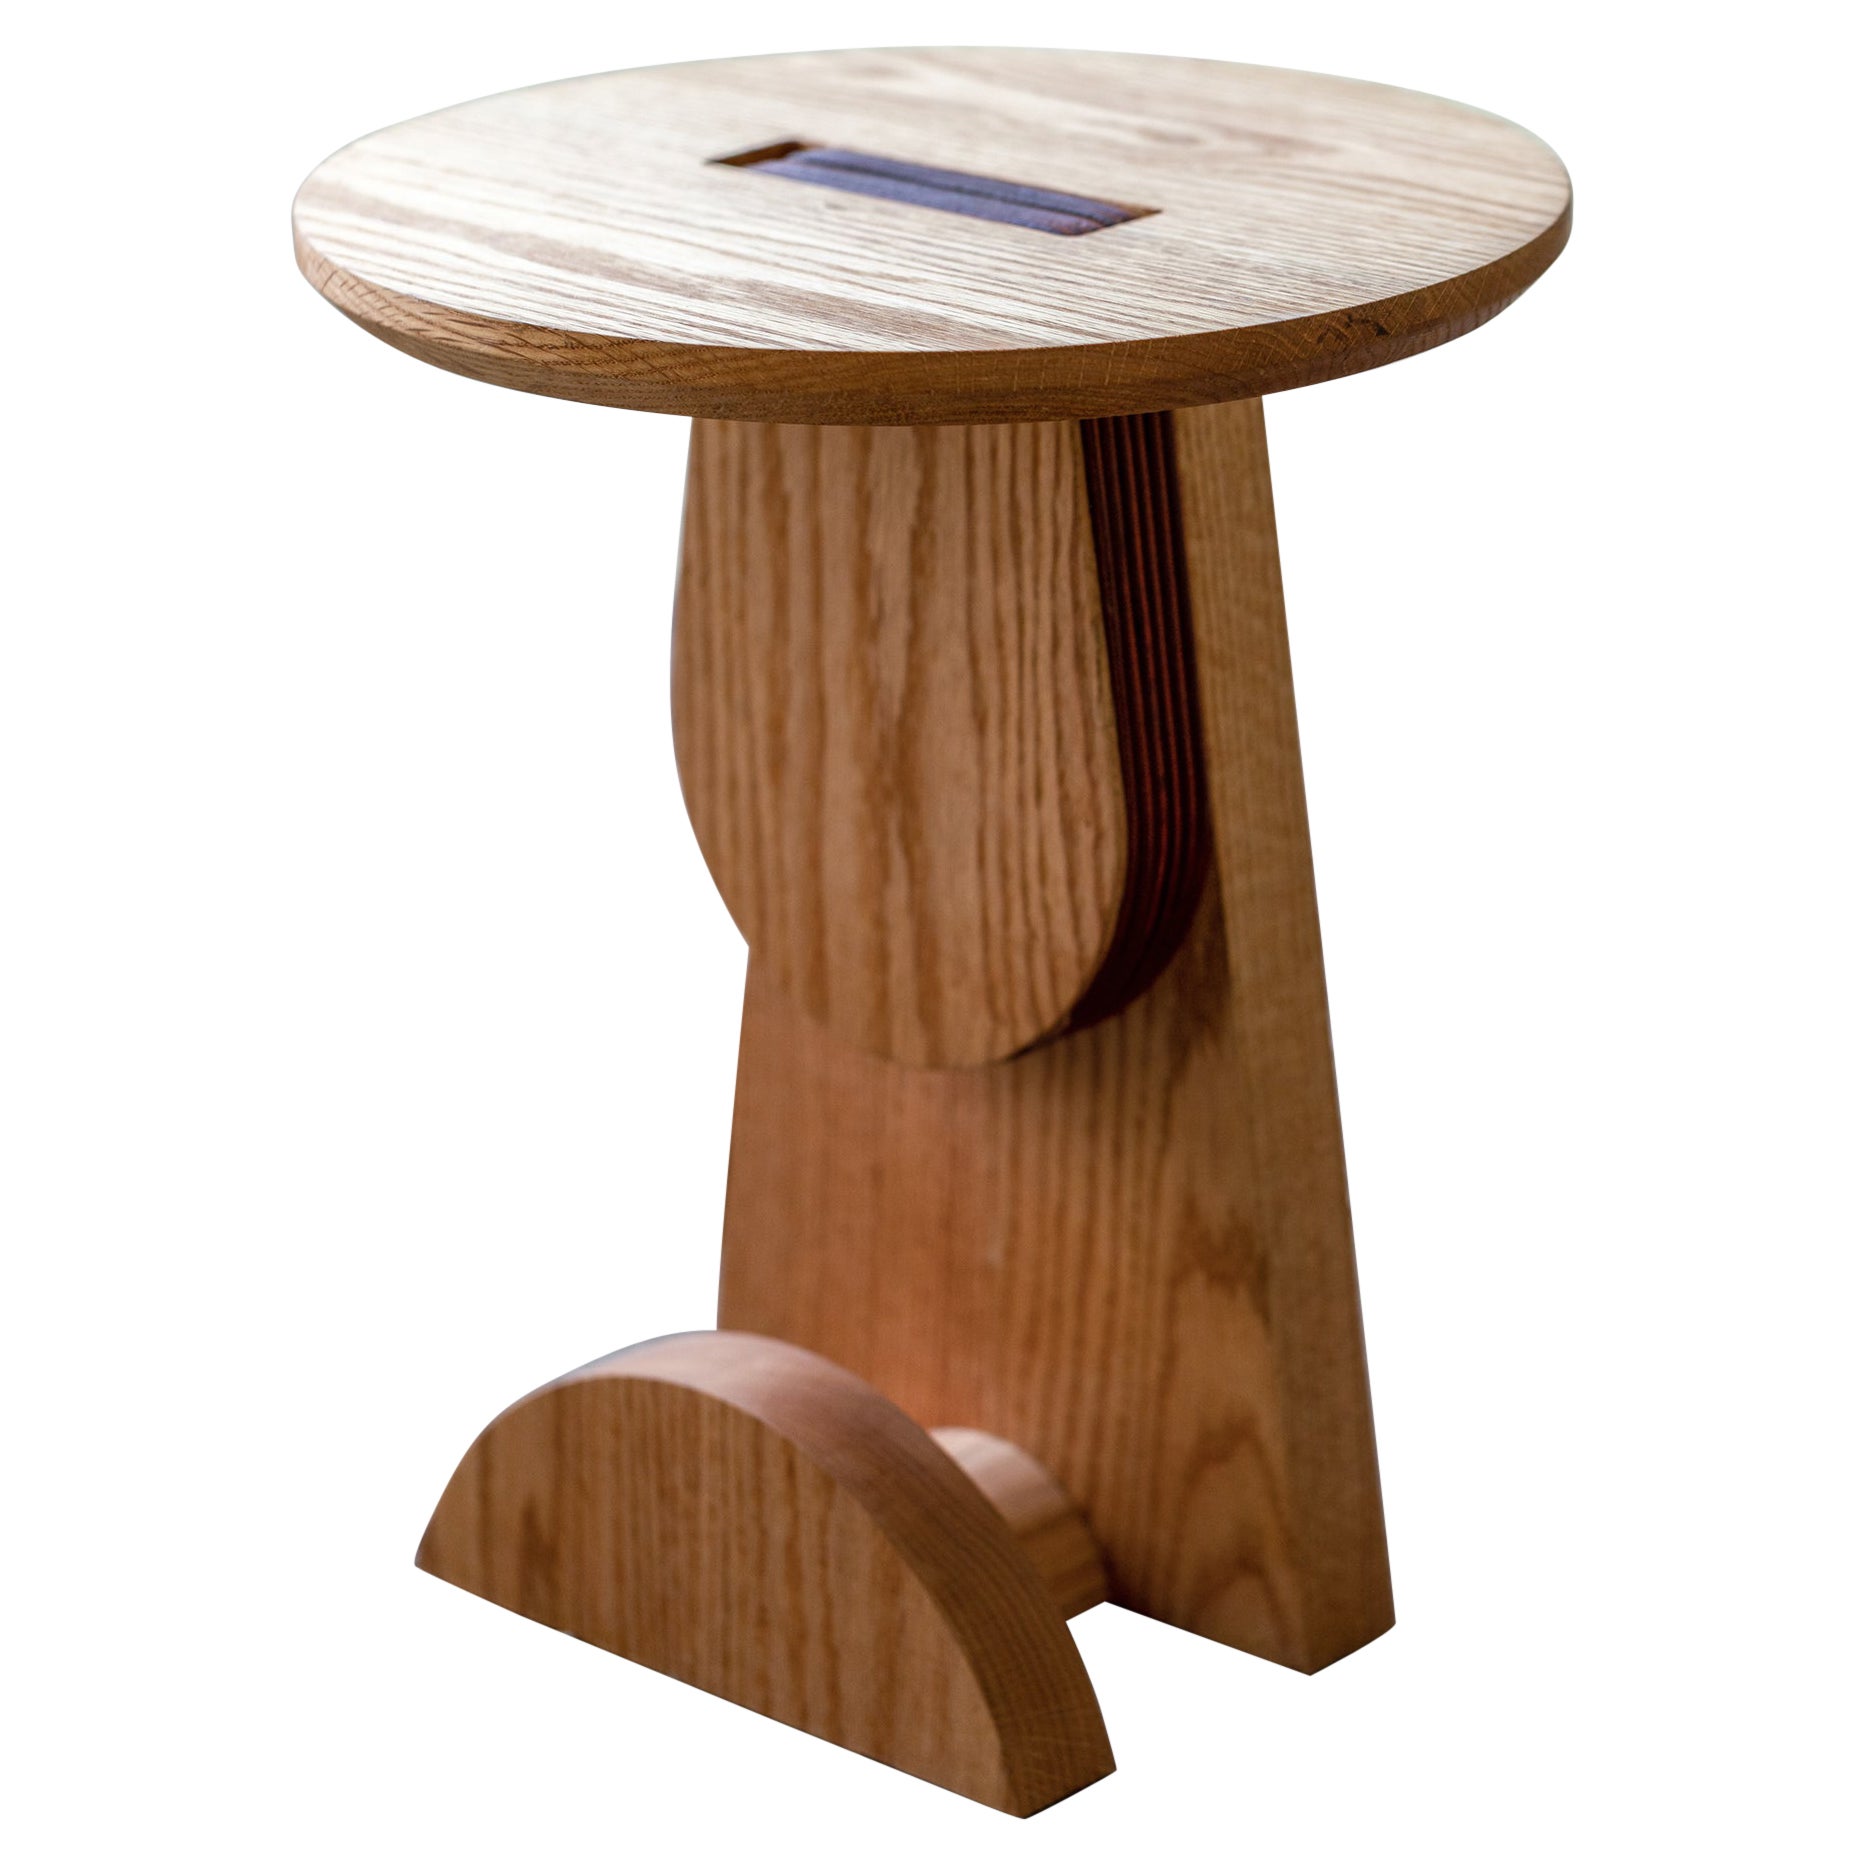 Basurto 03 Contemporary Wooden Stool with Leather details